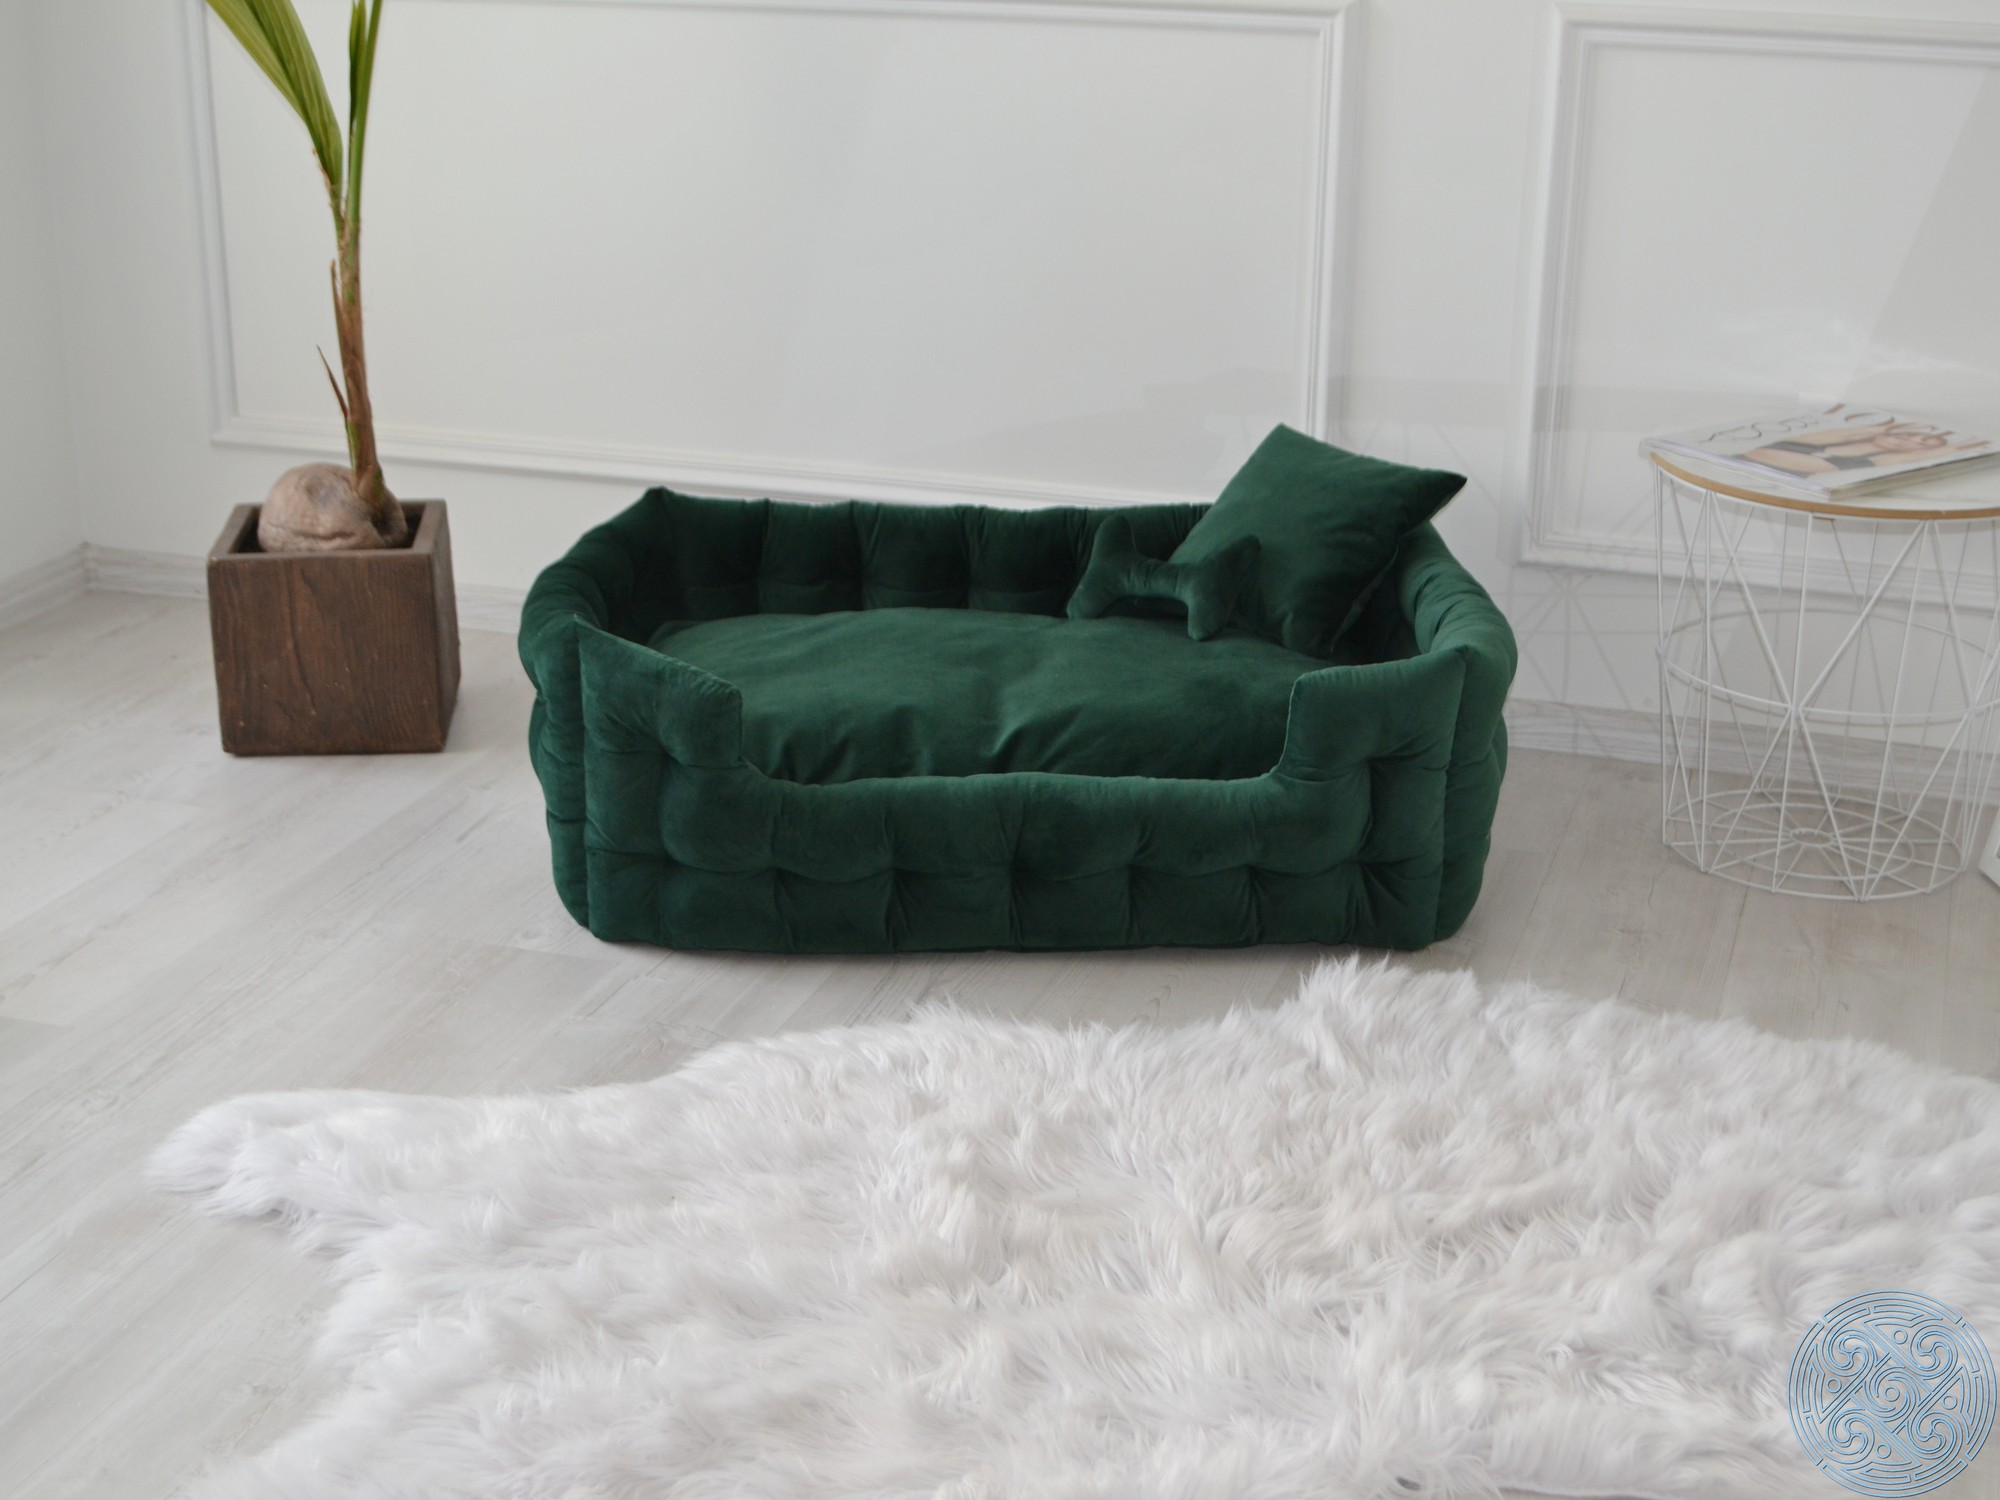 Indestructible in green sofa for large dogs with personalization - 19.6x15.7 in. (50x40 cm.)